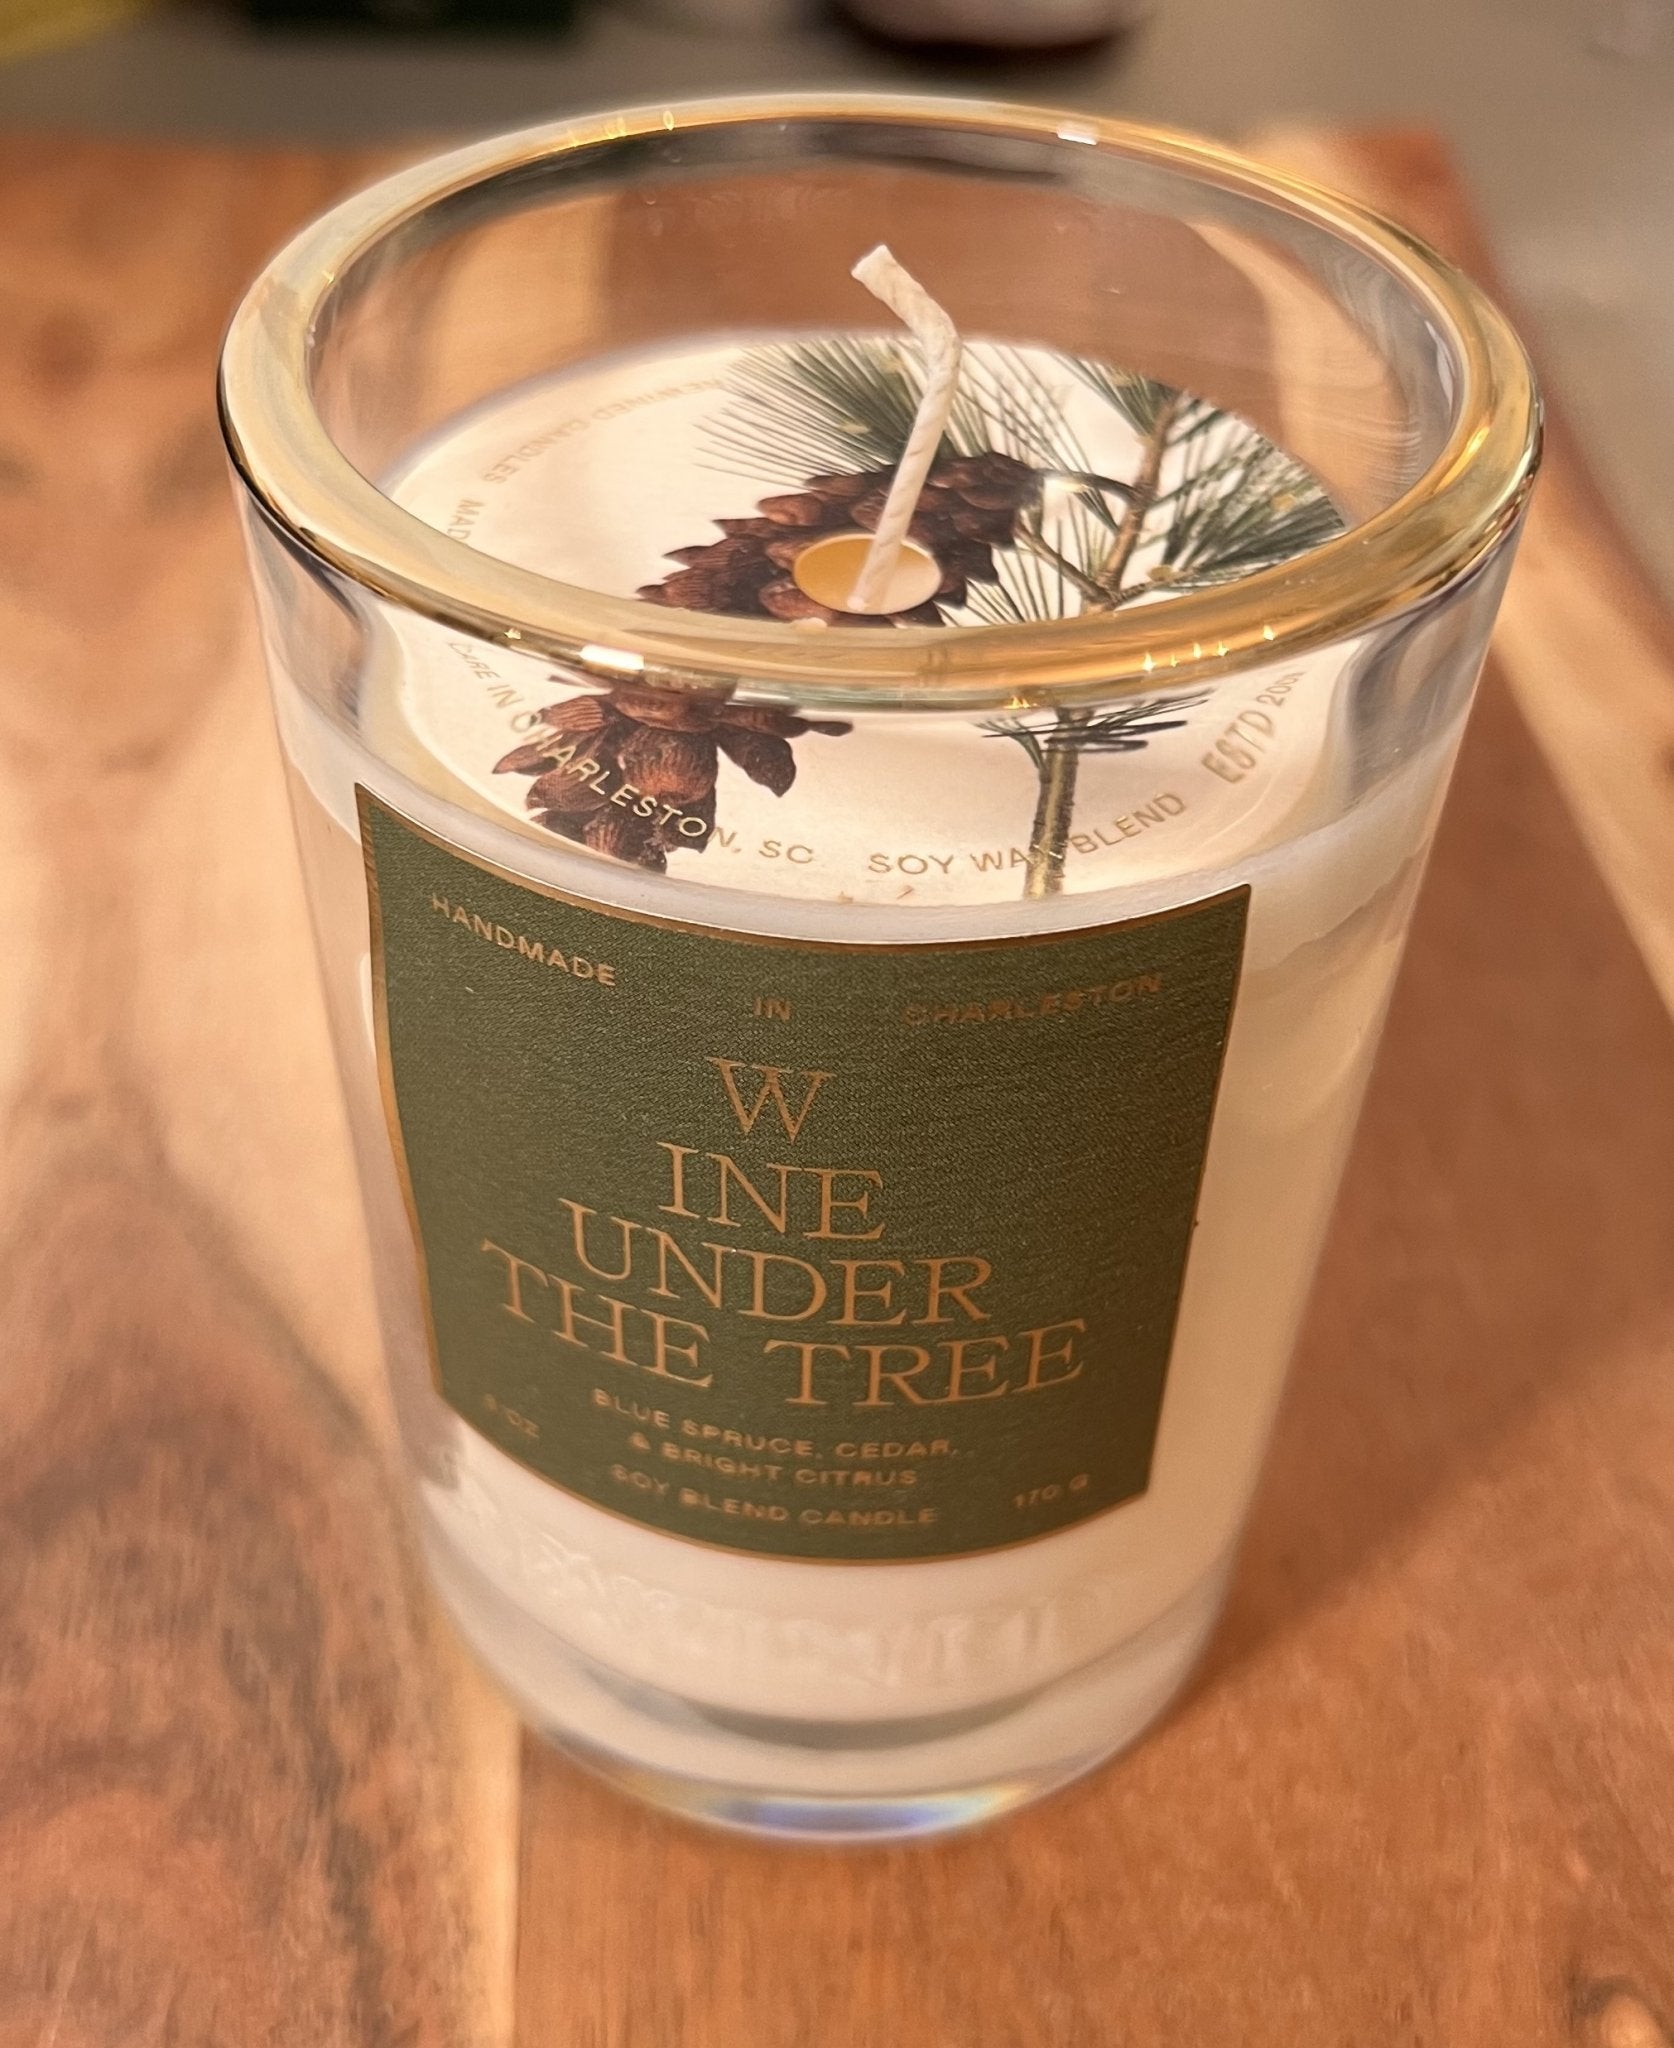 Rewined Wine Under the Tree Limited-Edition Holiday Candle - Essentially Charleston